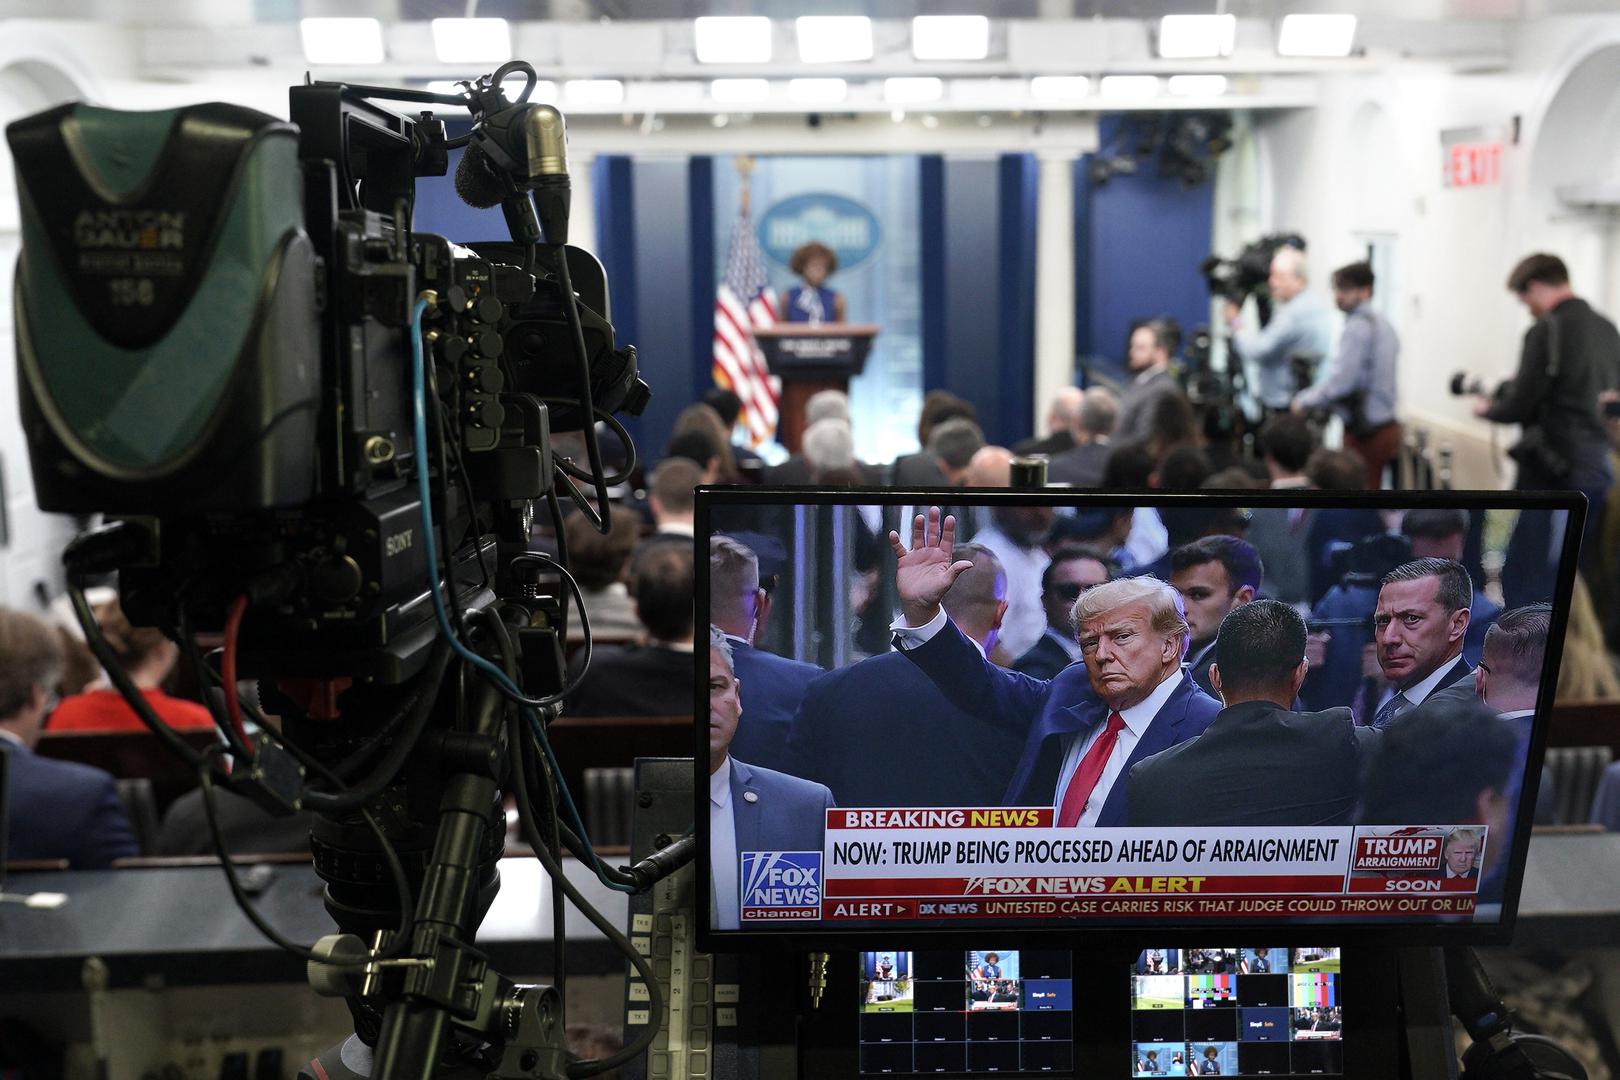 Former President Donald Trump is seen on TV screen during during a press briefing with White House Press Secretary Karine Jean-Pierre at the White House in Washington on March 29, 2023. Photo by Yuri Gripas/ABACAPRESS.COM Photo: Pool/ABACA/ABACA